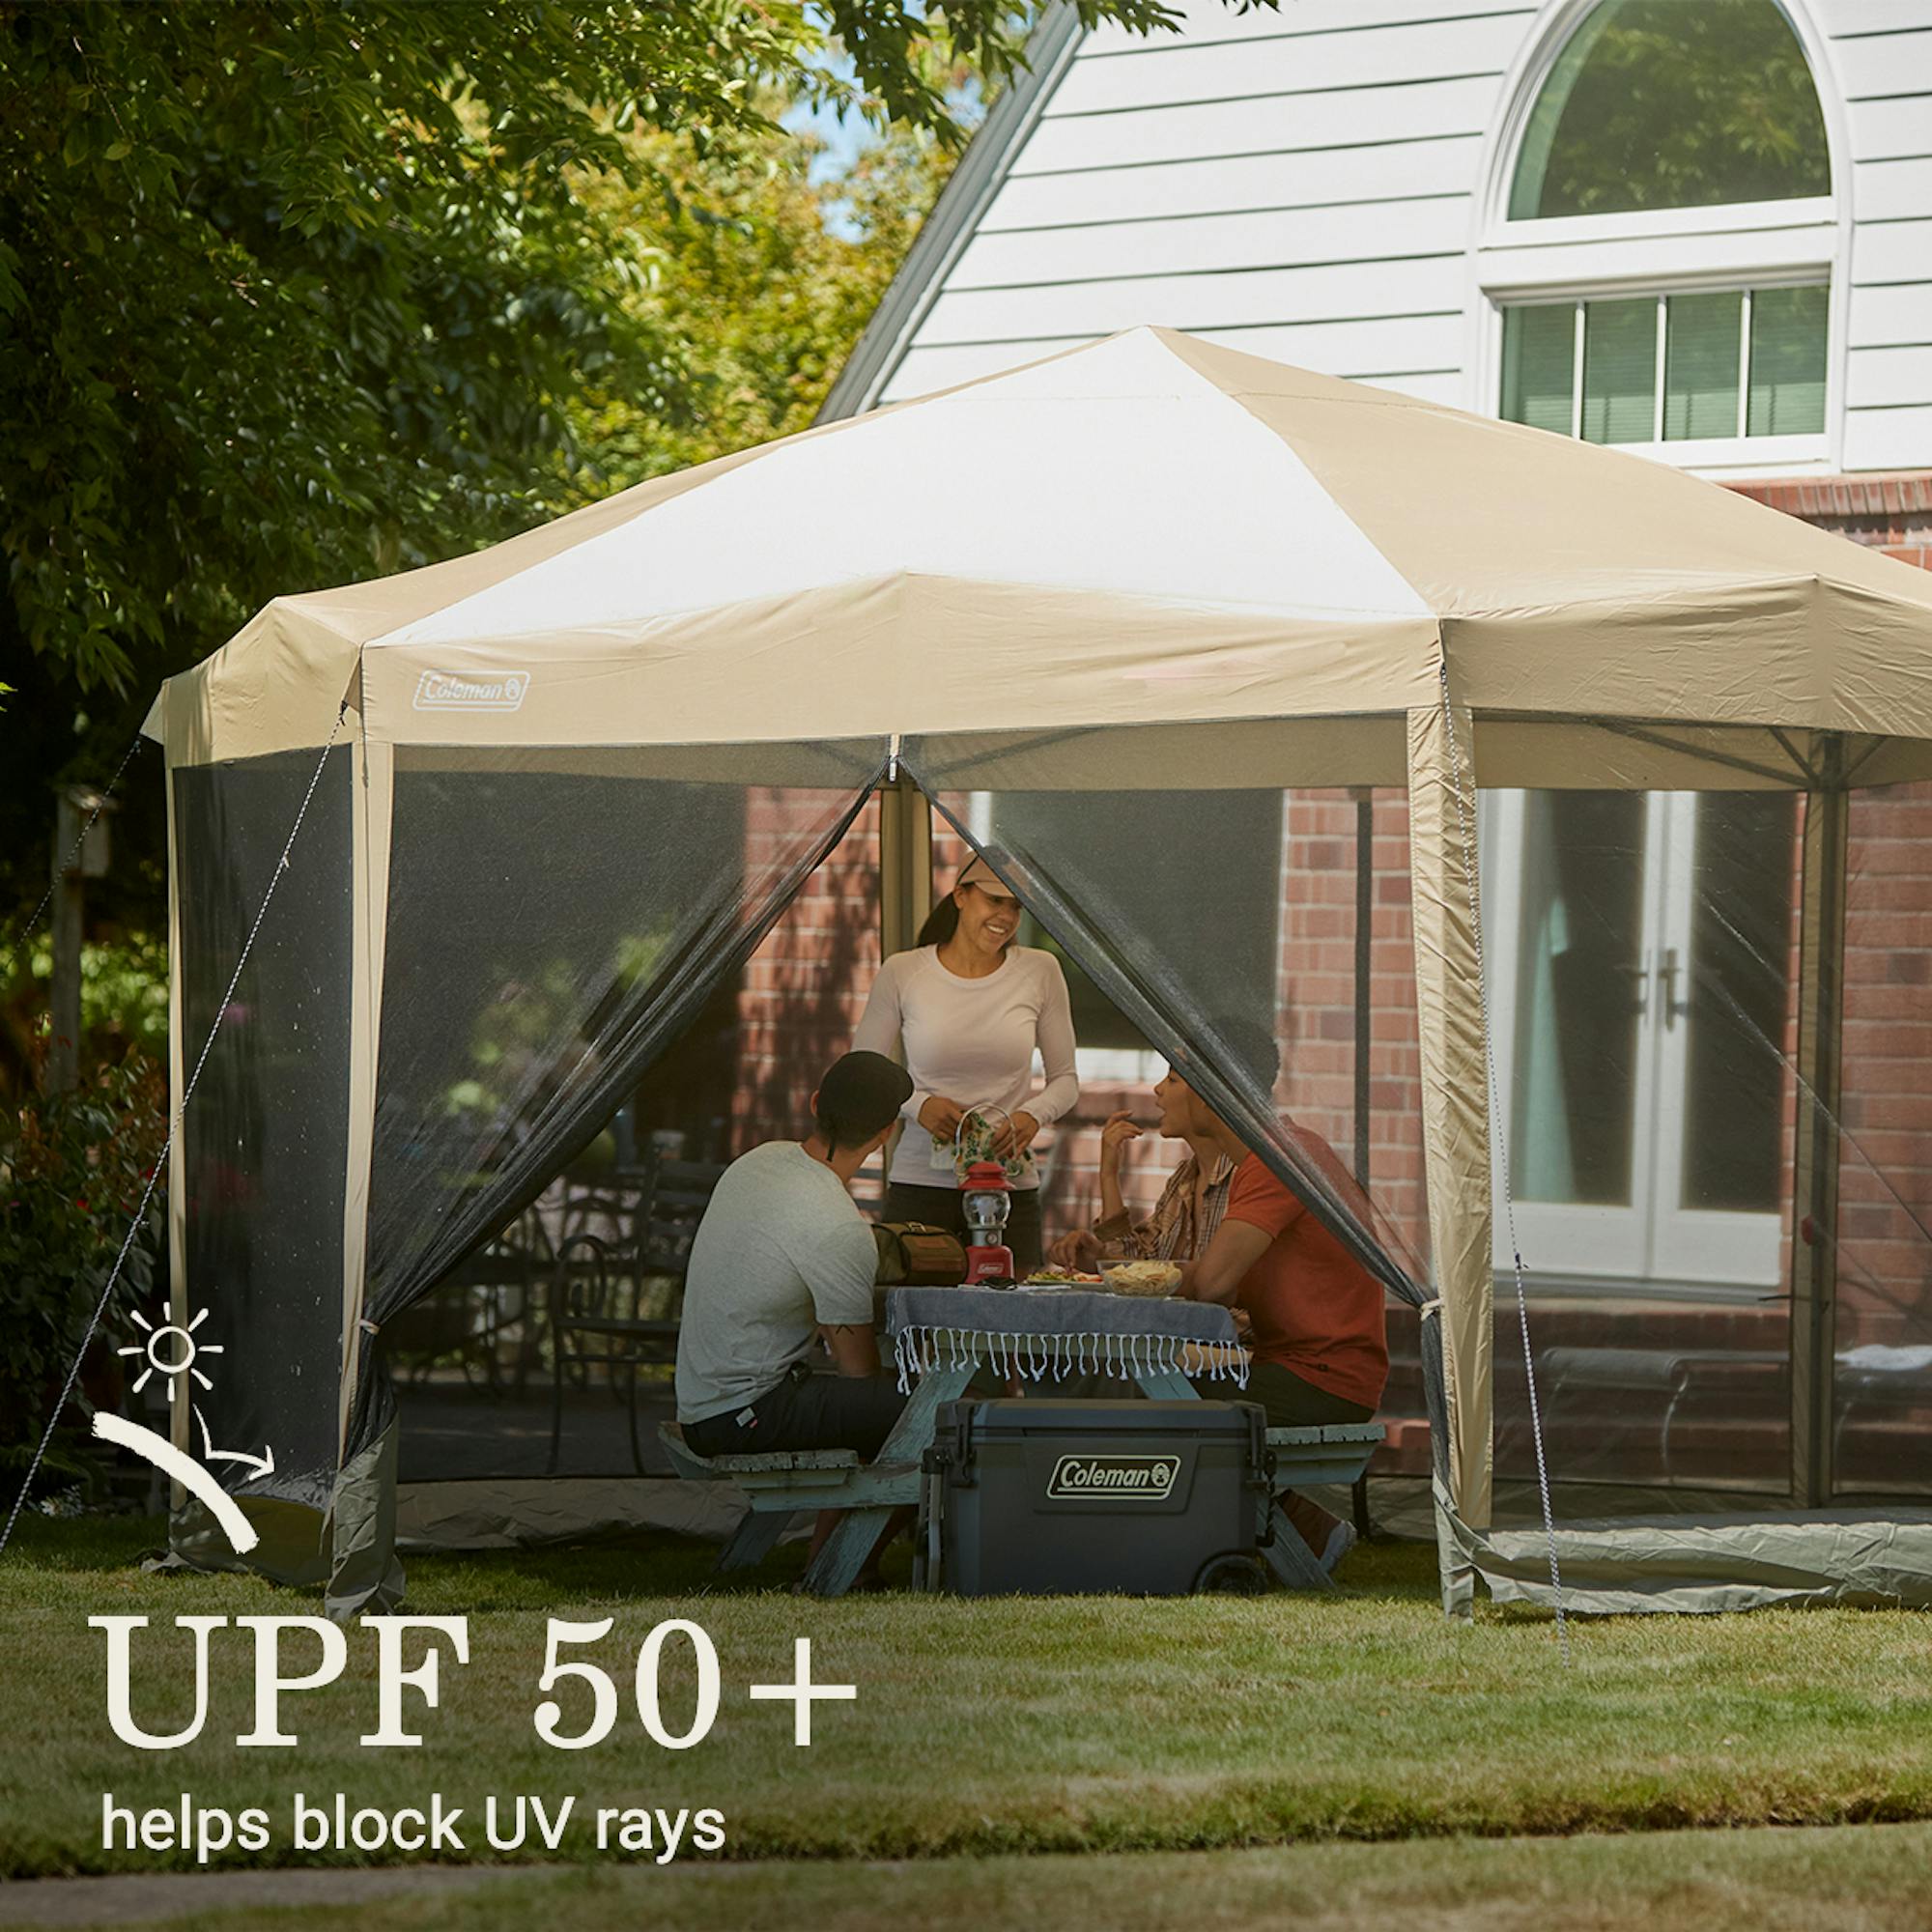 Back Home™ 15 x 13 ft. Screen Canopy Tent | Coleman CA